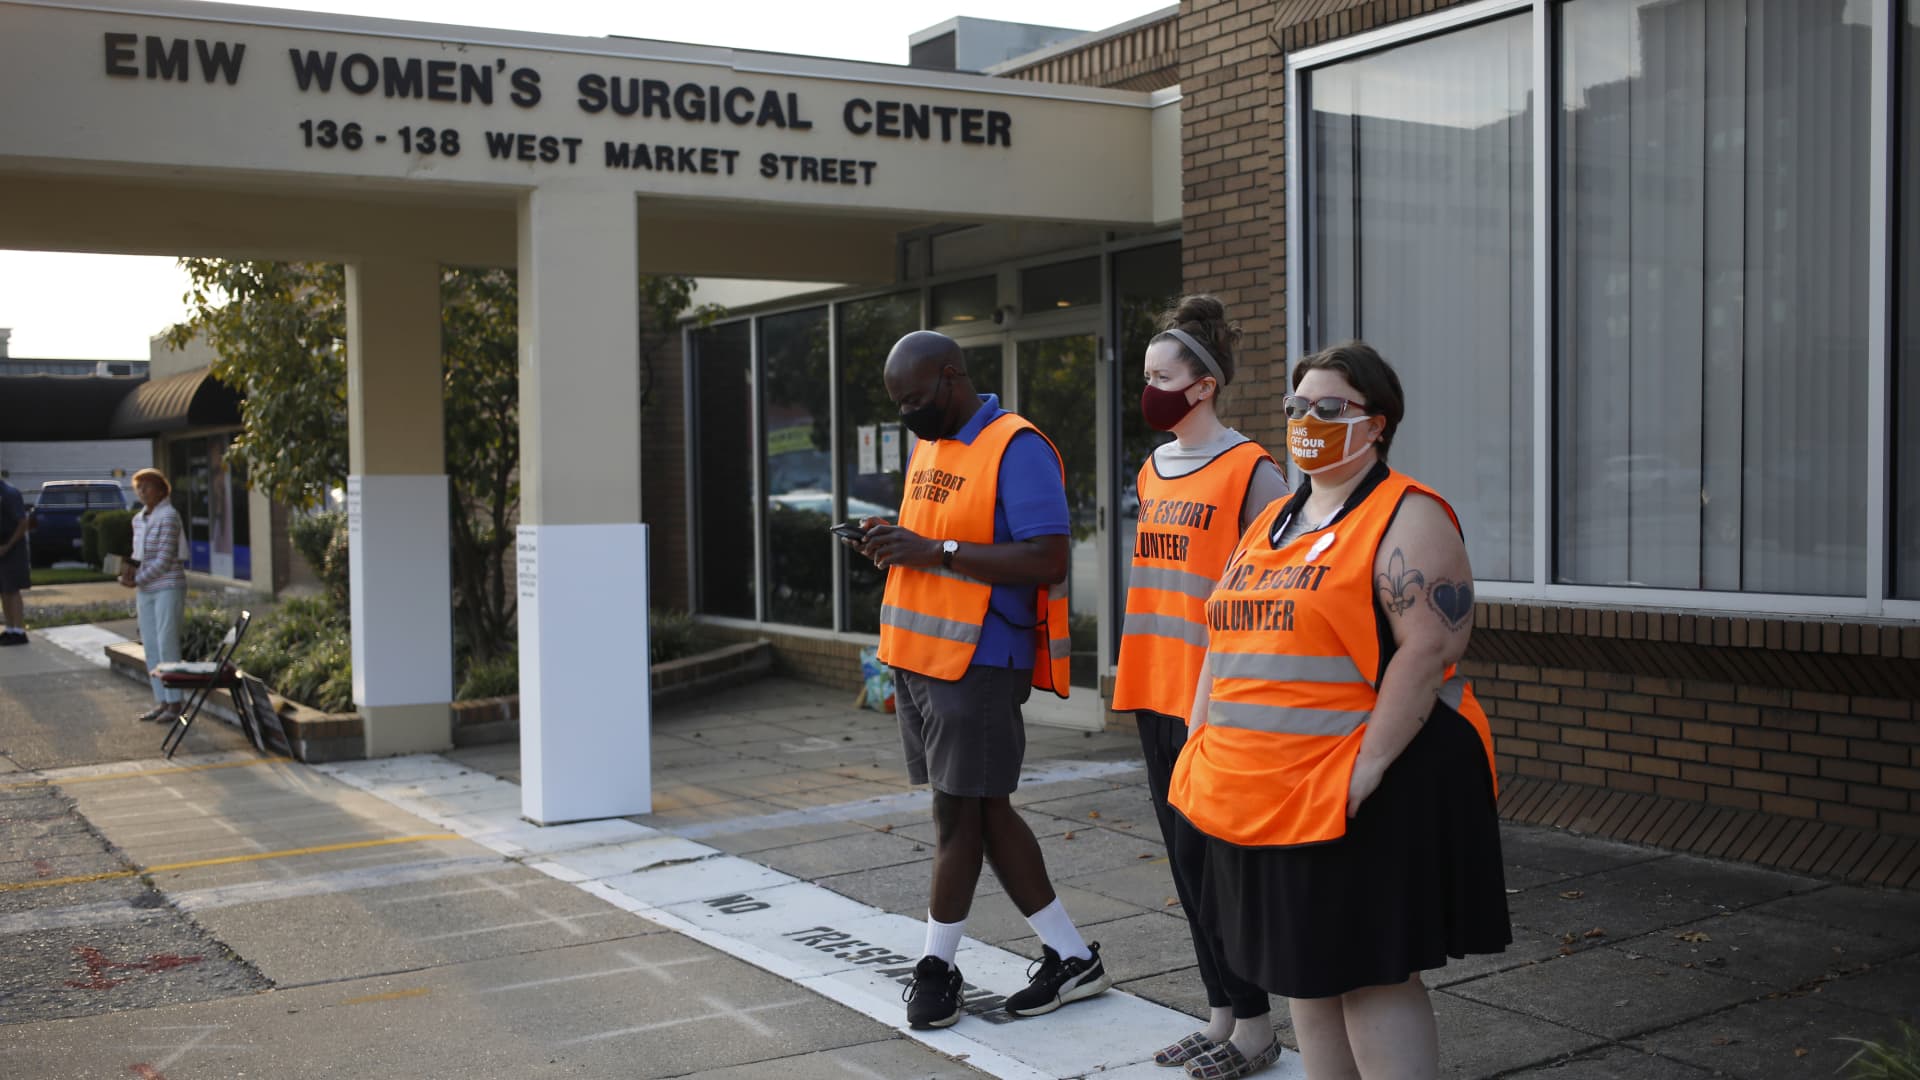 Volunteer clinic escorts wait for patients outside the EMW Women's Surgical Center in Louisville, Kentucky, U.S., on Tuesday, Sept. 28, 2021.